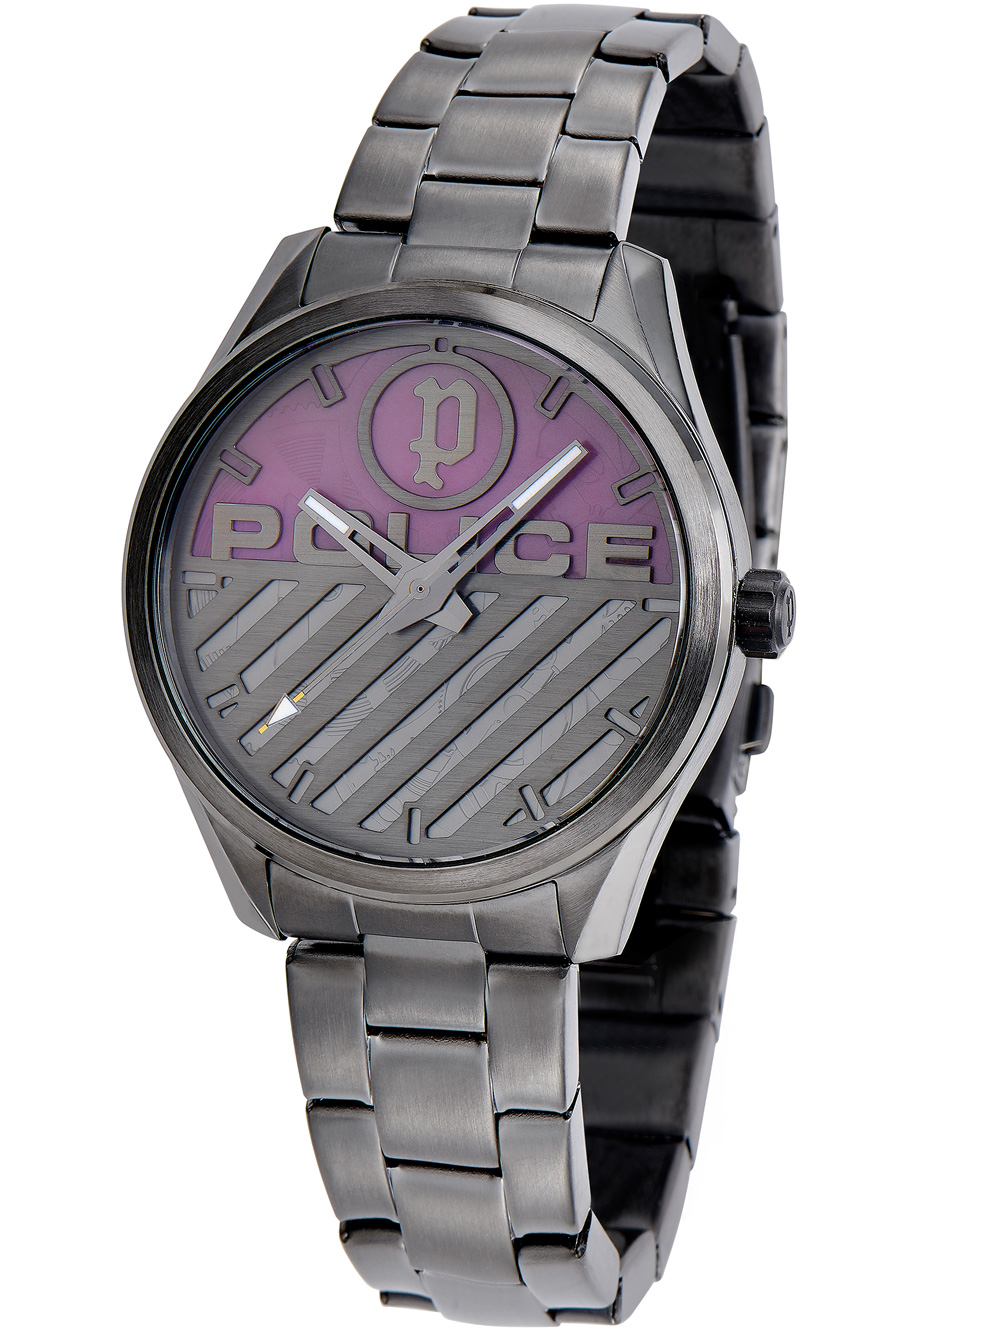 Police PEWJG2121405 Grille 42mm cheap Mens shopping: Timeshop24 watch